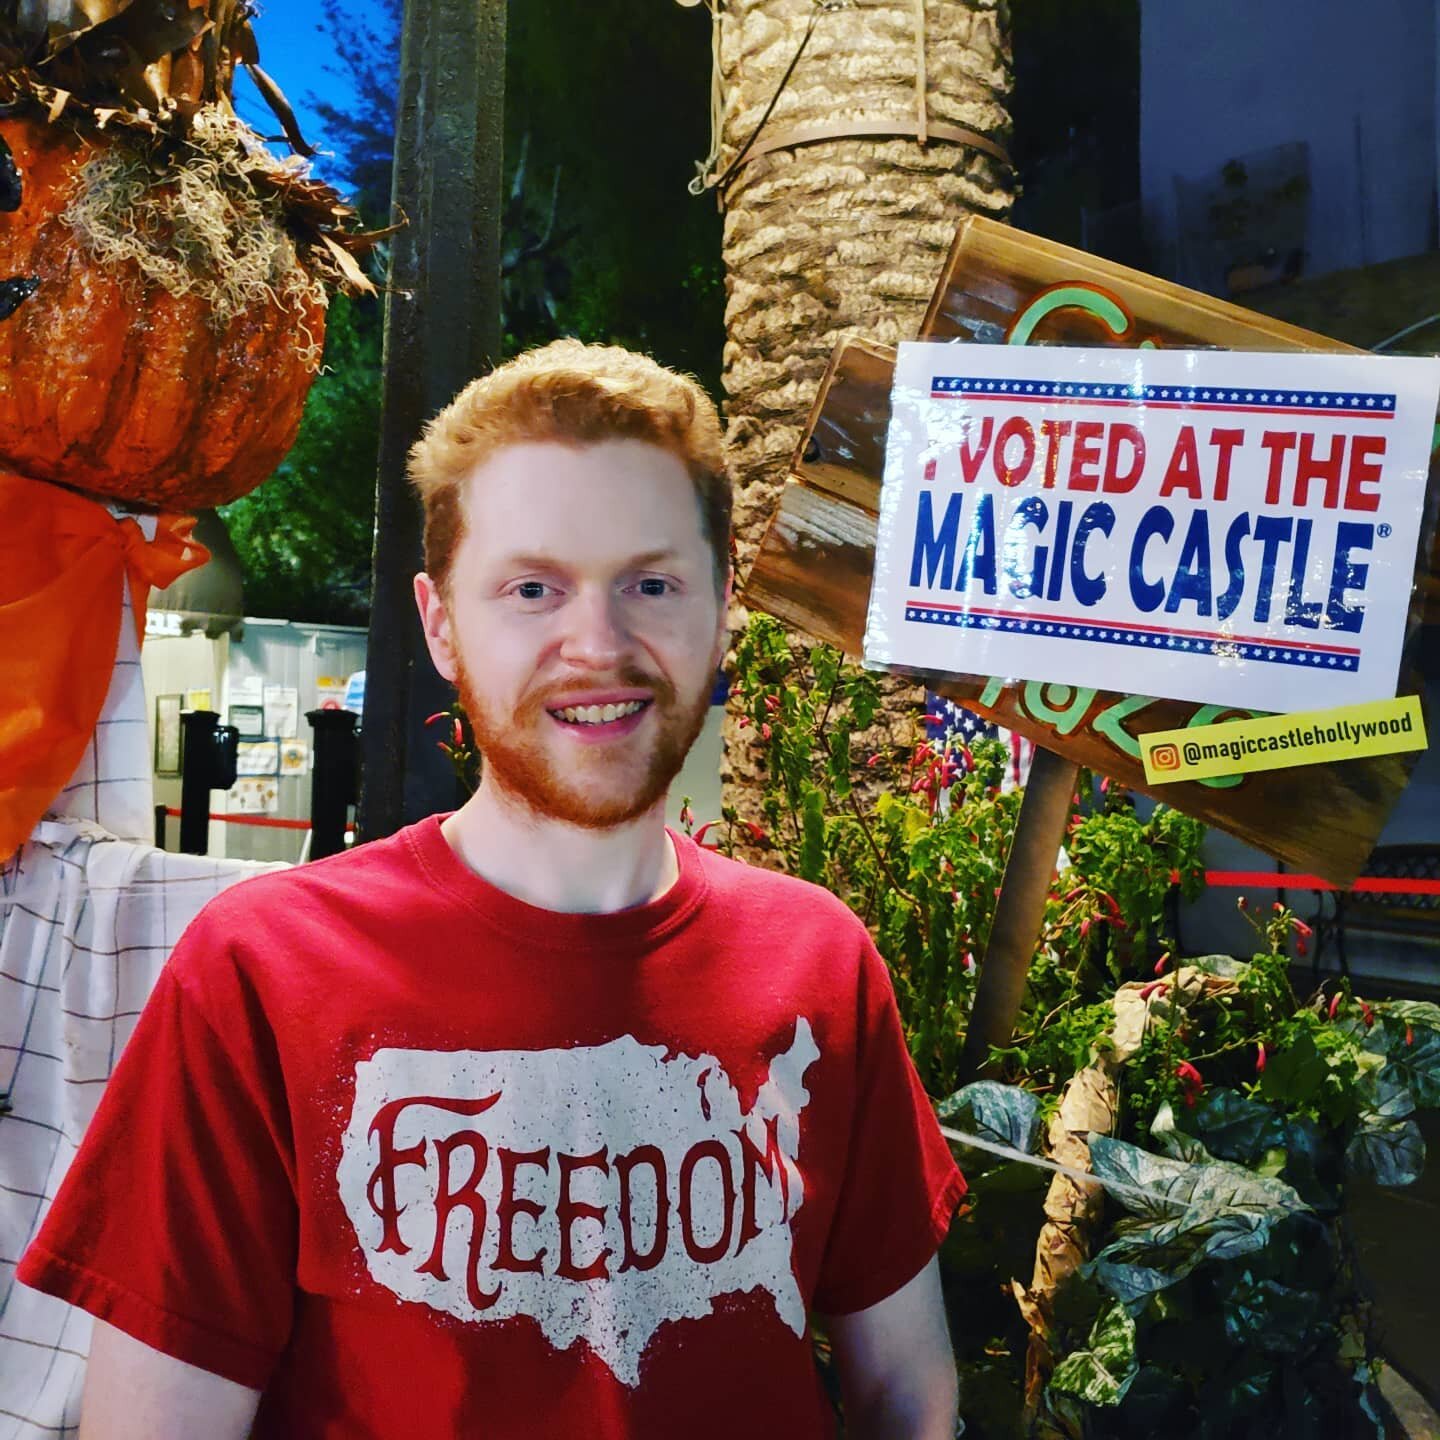 I voted at one of the most incredible places to do so @magiccastlehollywood 

I hope you were able to make it out and vote as well.

#magic #magiccastle #magiccastlehollywood #vote #vote2020  #usa #generalelection #hollywood #losangeles #votingselfie